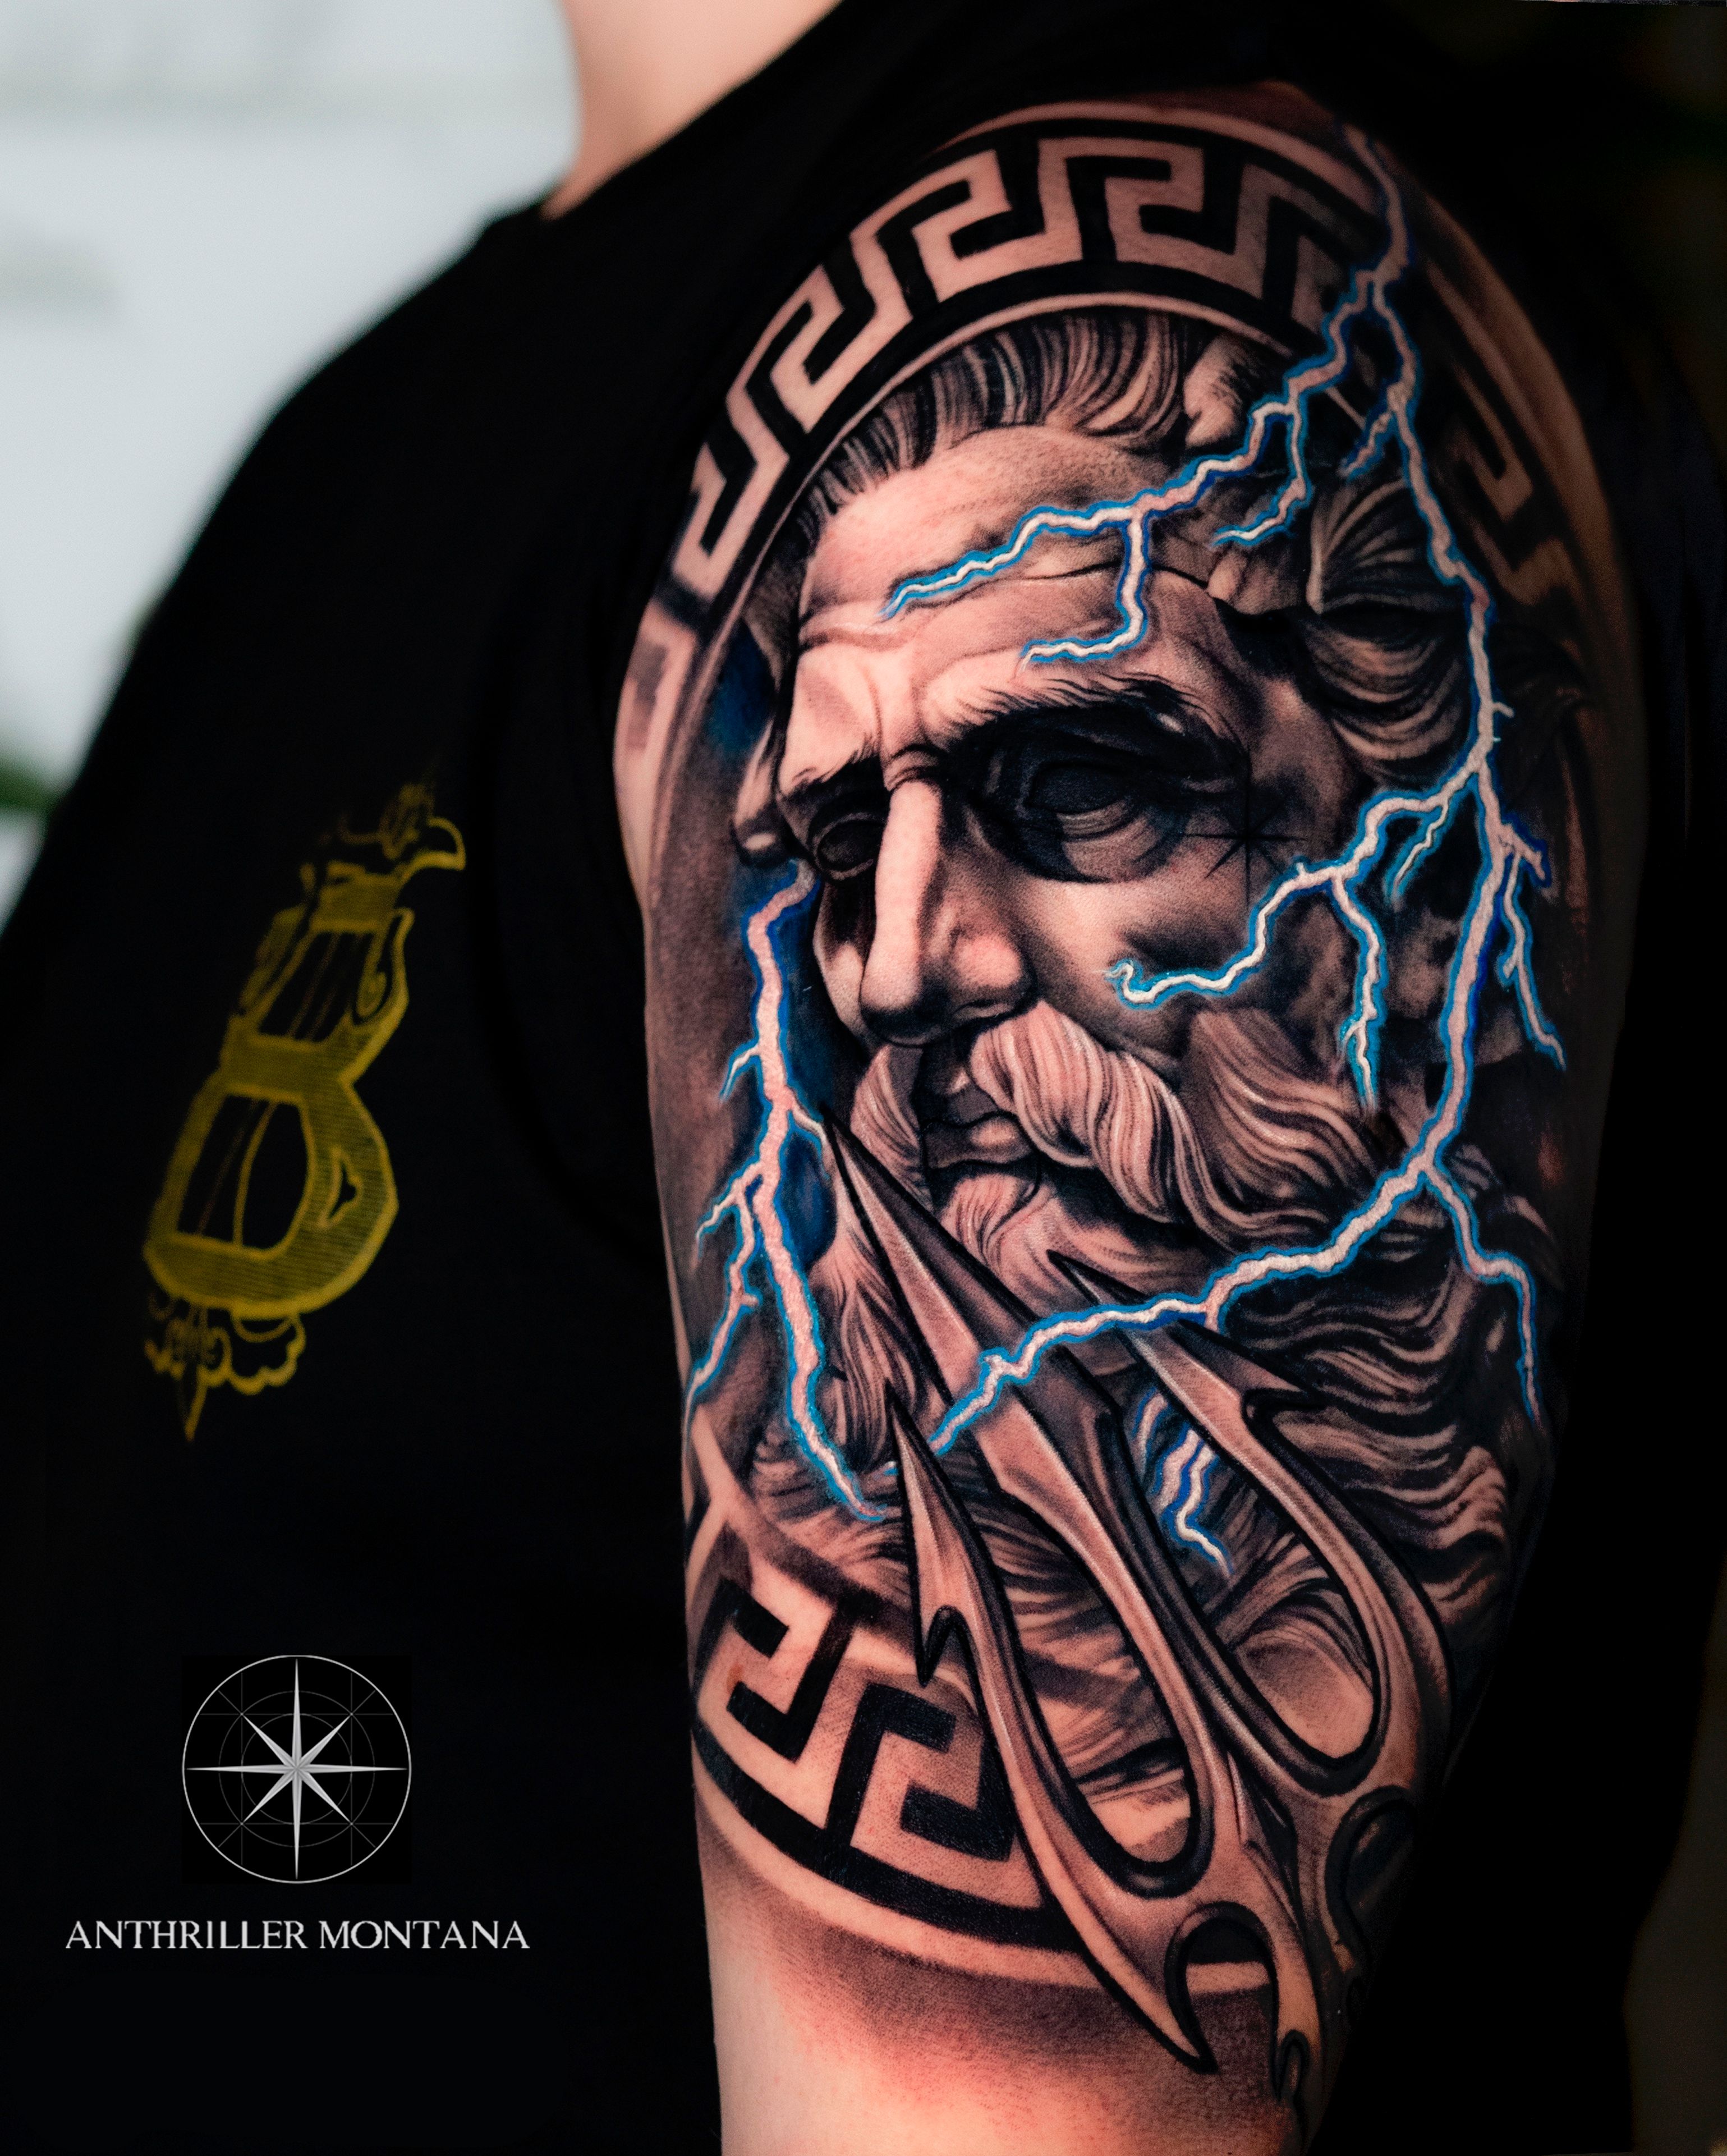 Inkboy Tattoo Studio  Poseidon the brother of Zues and Hades these three  gods divided up creation Poseidon was the God of the sea  earthquakes  and horses About half way done